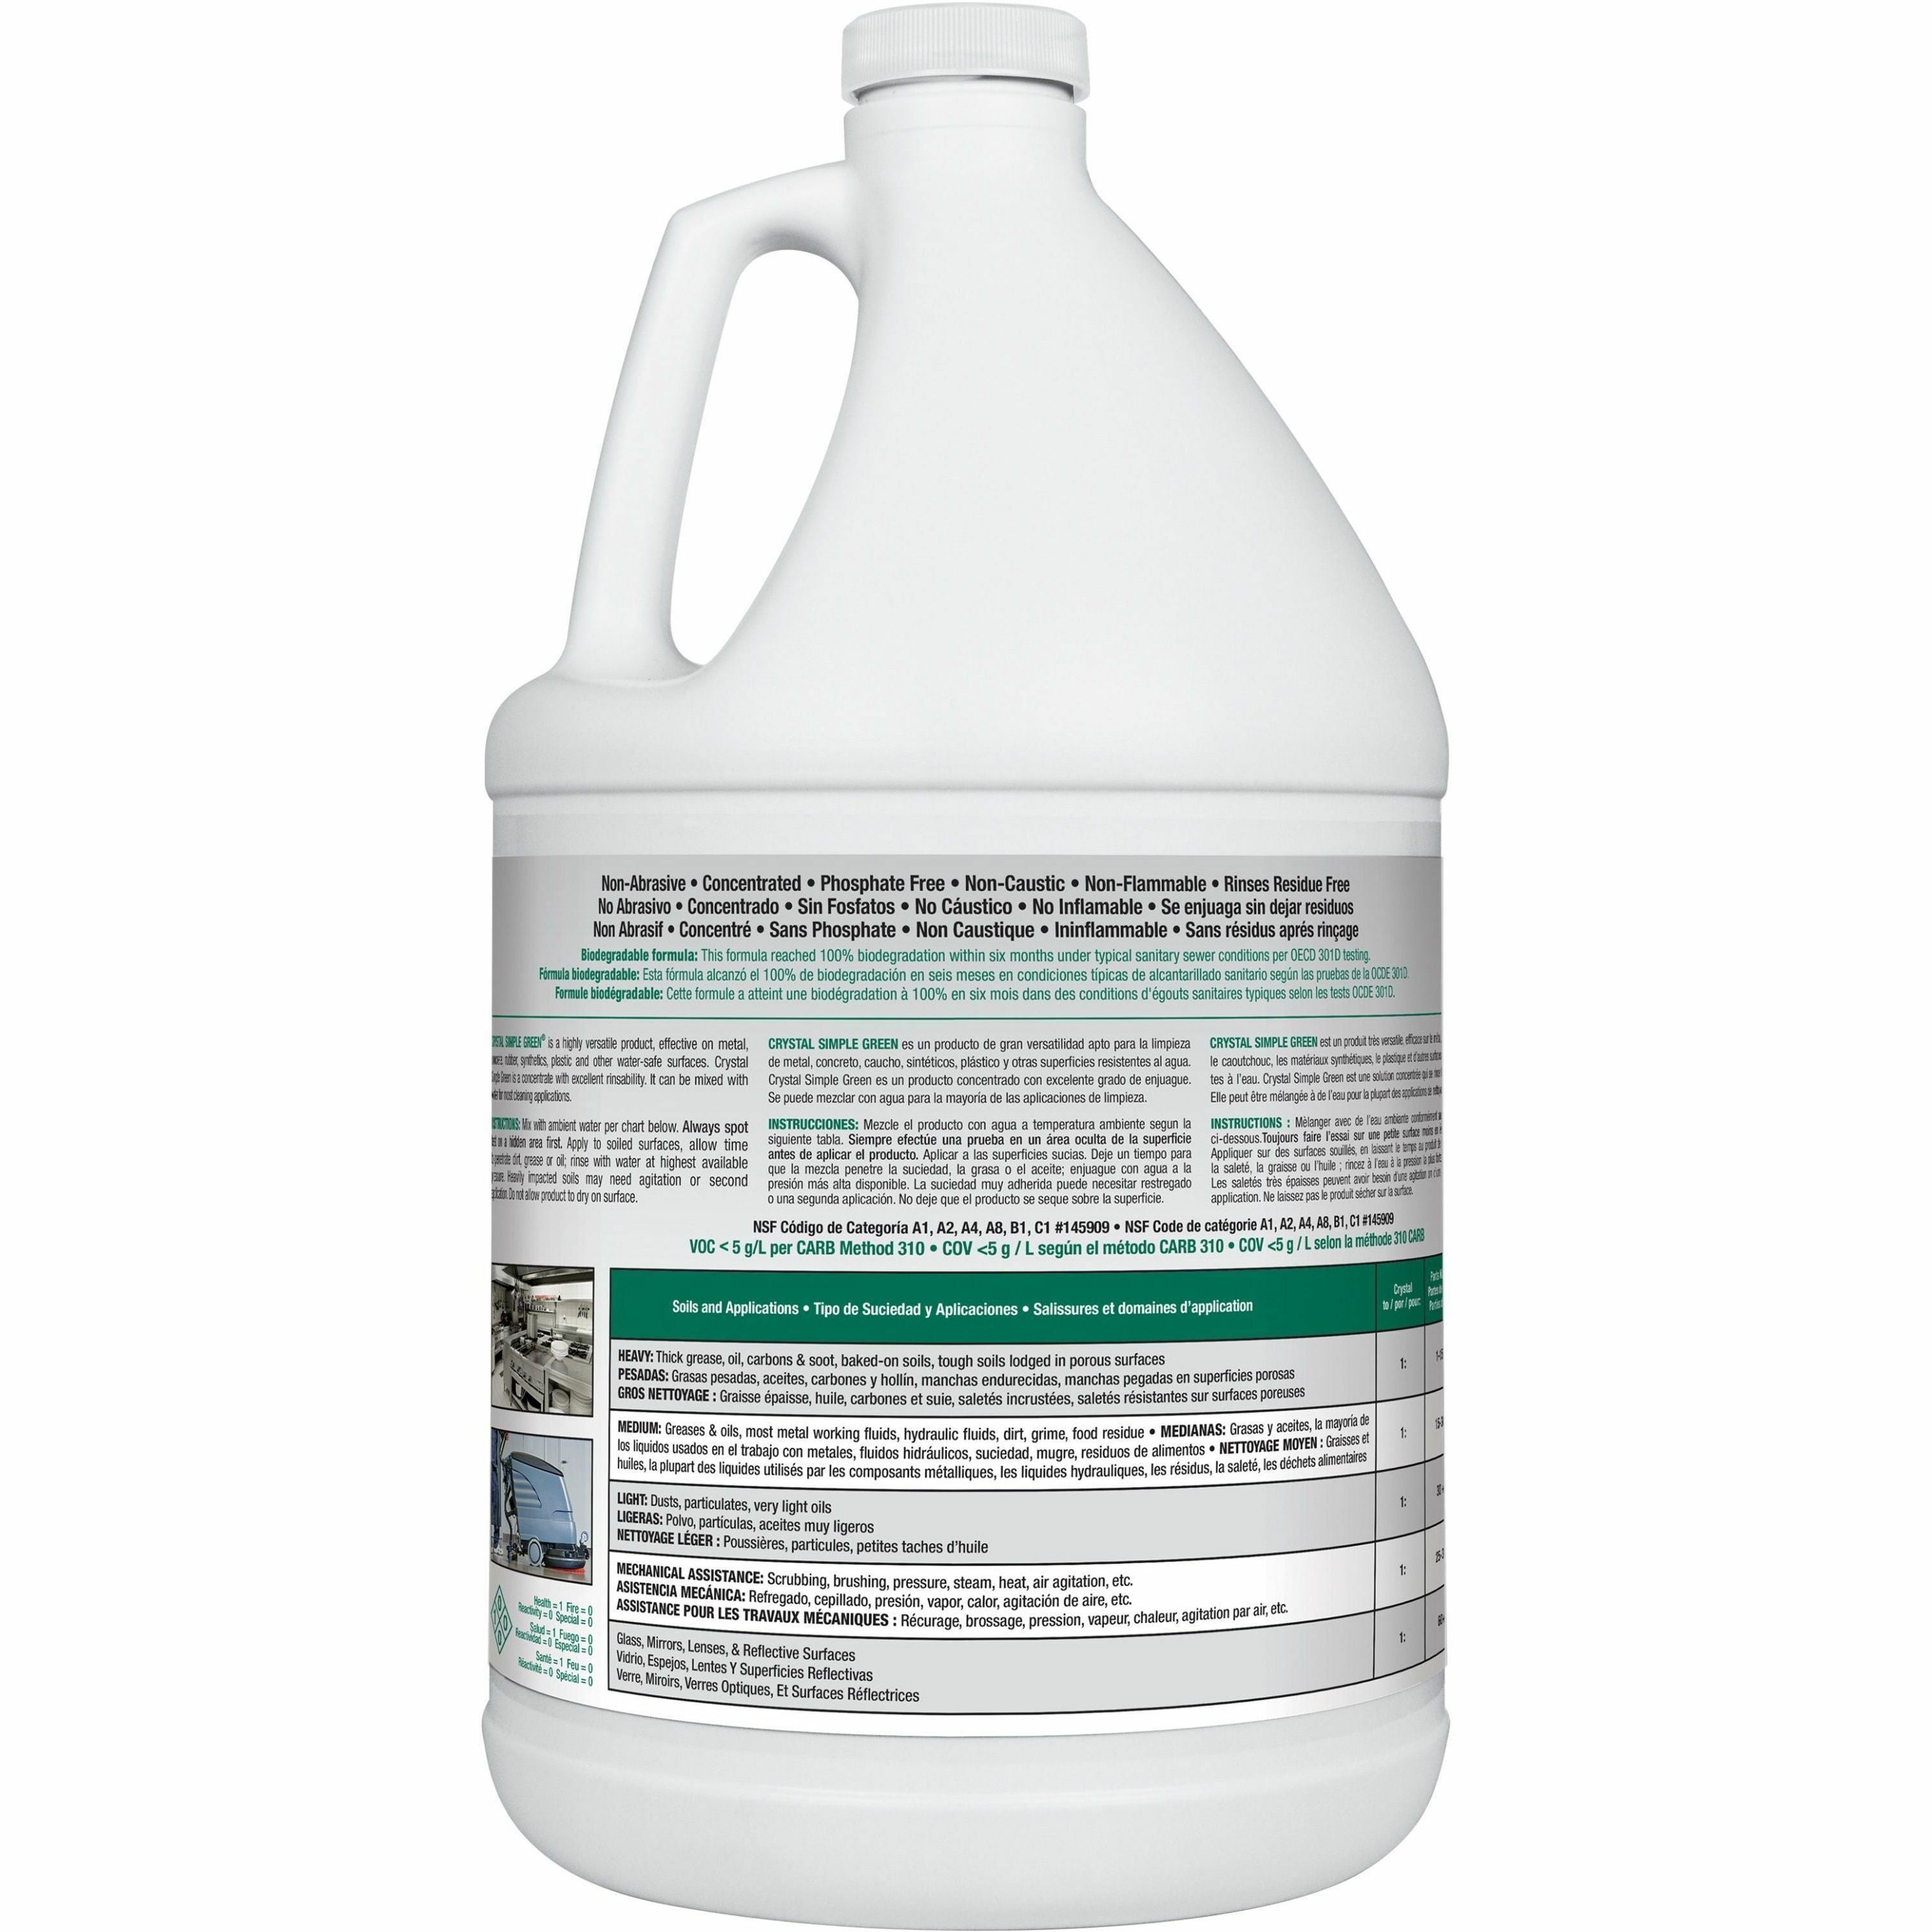 simple-green-crystal-industrial-cleaner-degreaser-concentrate-128-fl-oz-4-quartbottle-6-carton-fragrance-free-phosphate-free-non-toxic-soft-non-abrasive-non-flammable-butyl-free-unscented-dye-free-clear_smp19128ct - 2